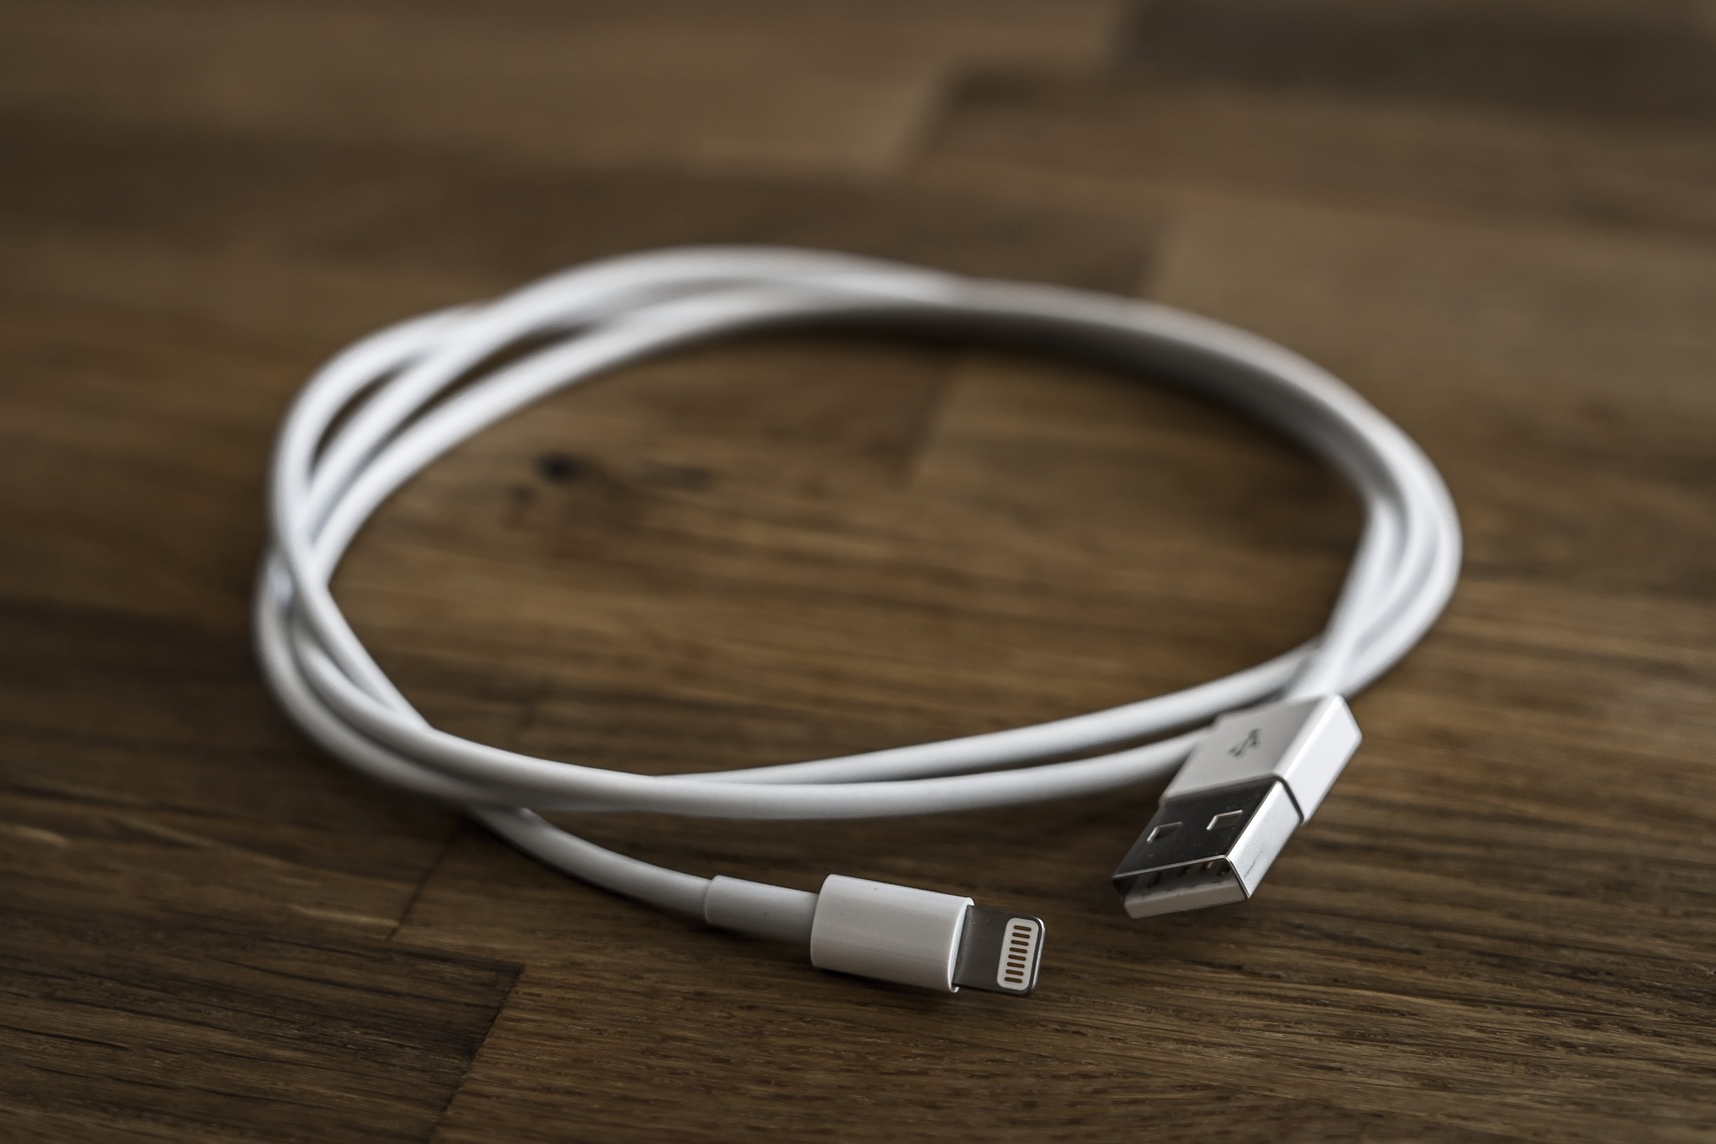 Apple Will Switch iPhone to USB-C Because 'We Have No Choice